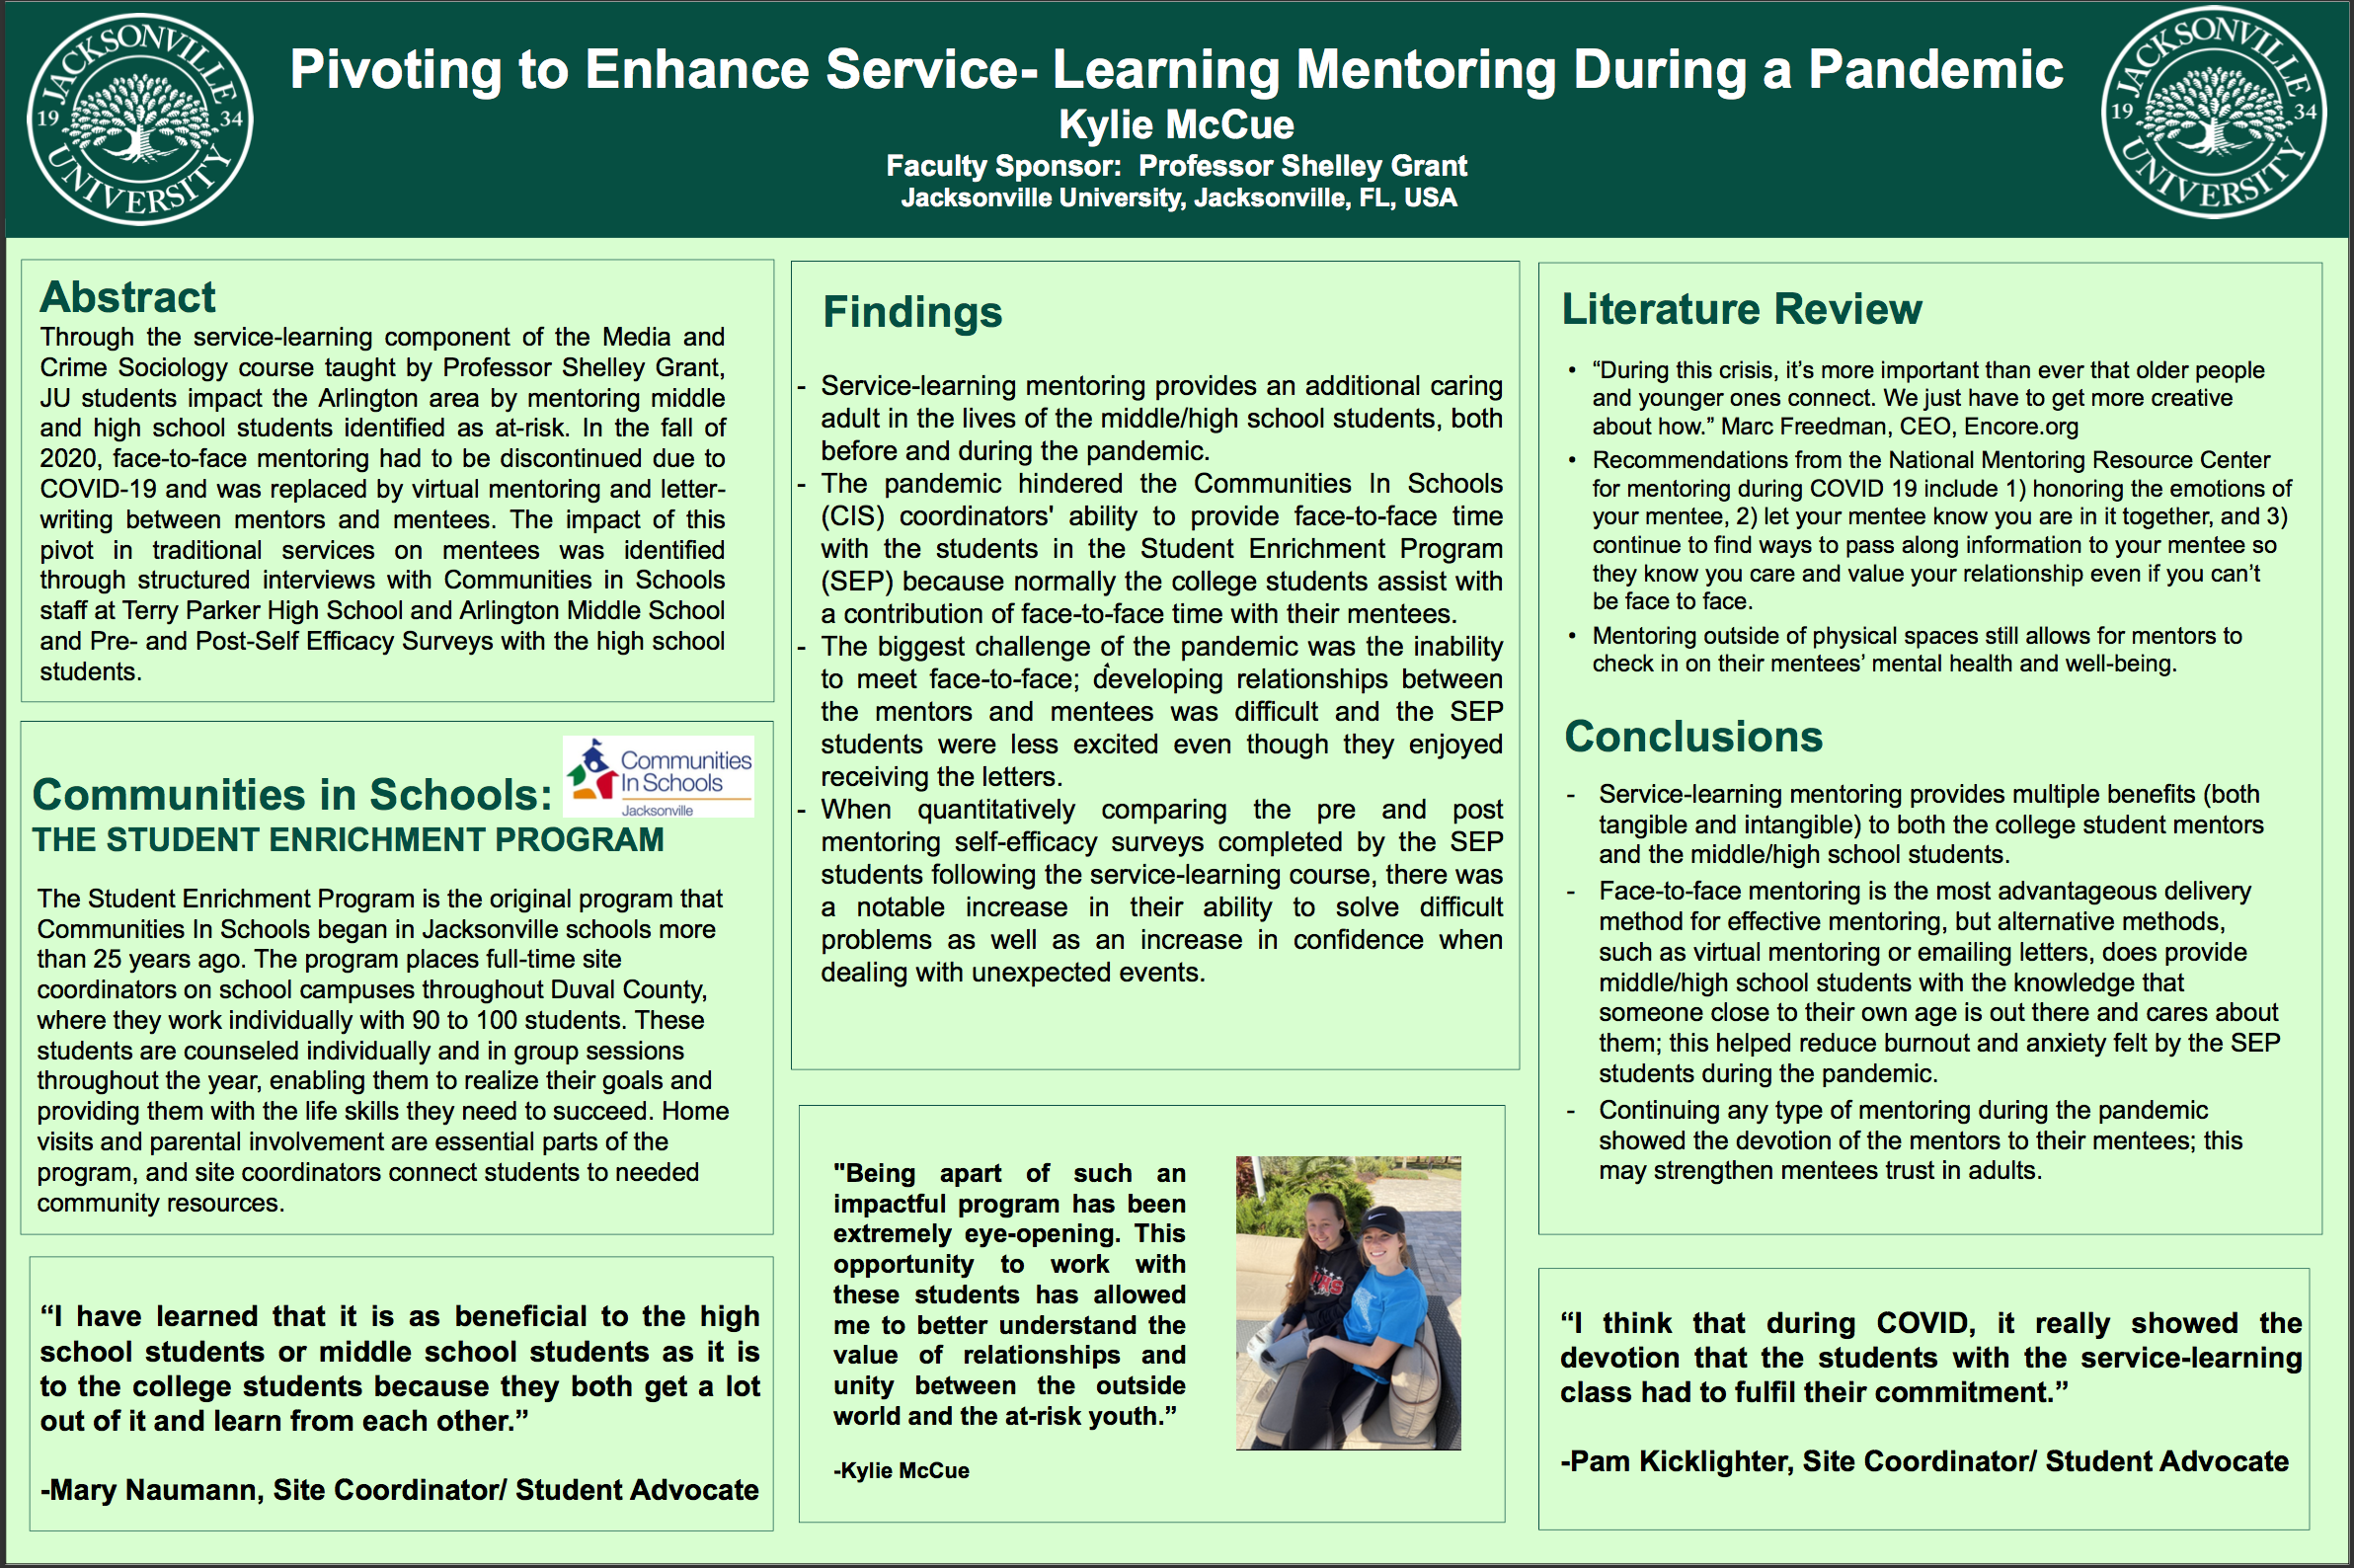 Showcase Image for Pivoting to Enhance Service- Learning Mentoring During a Pandemic